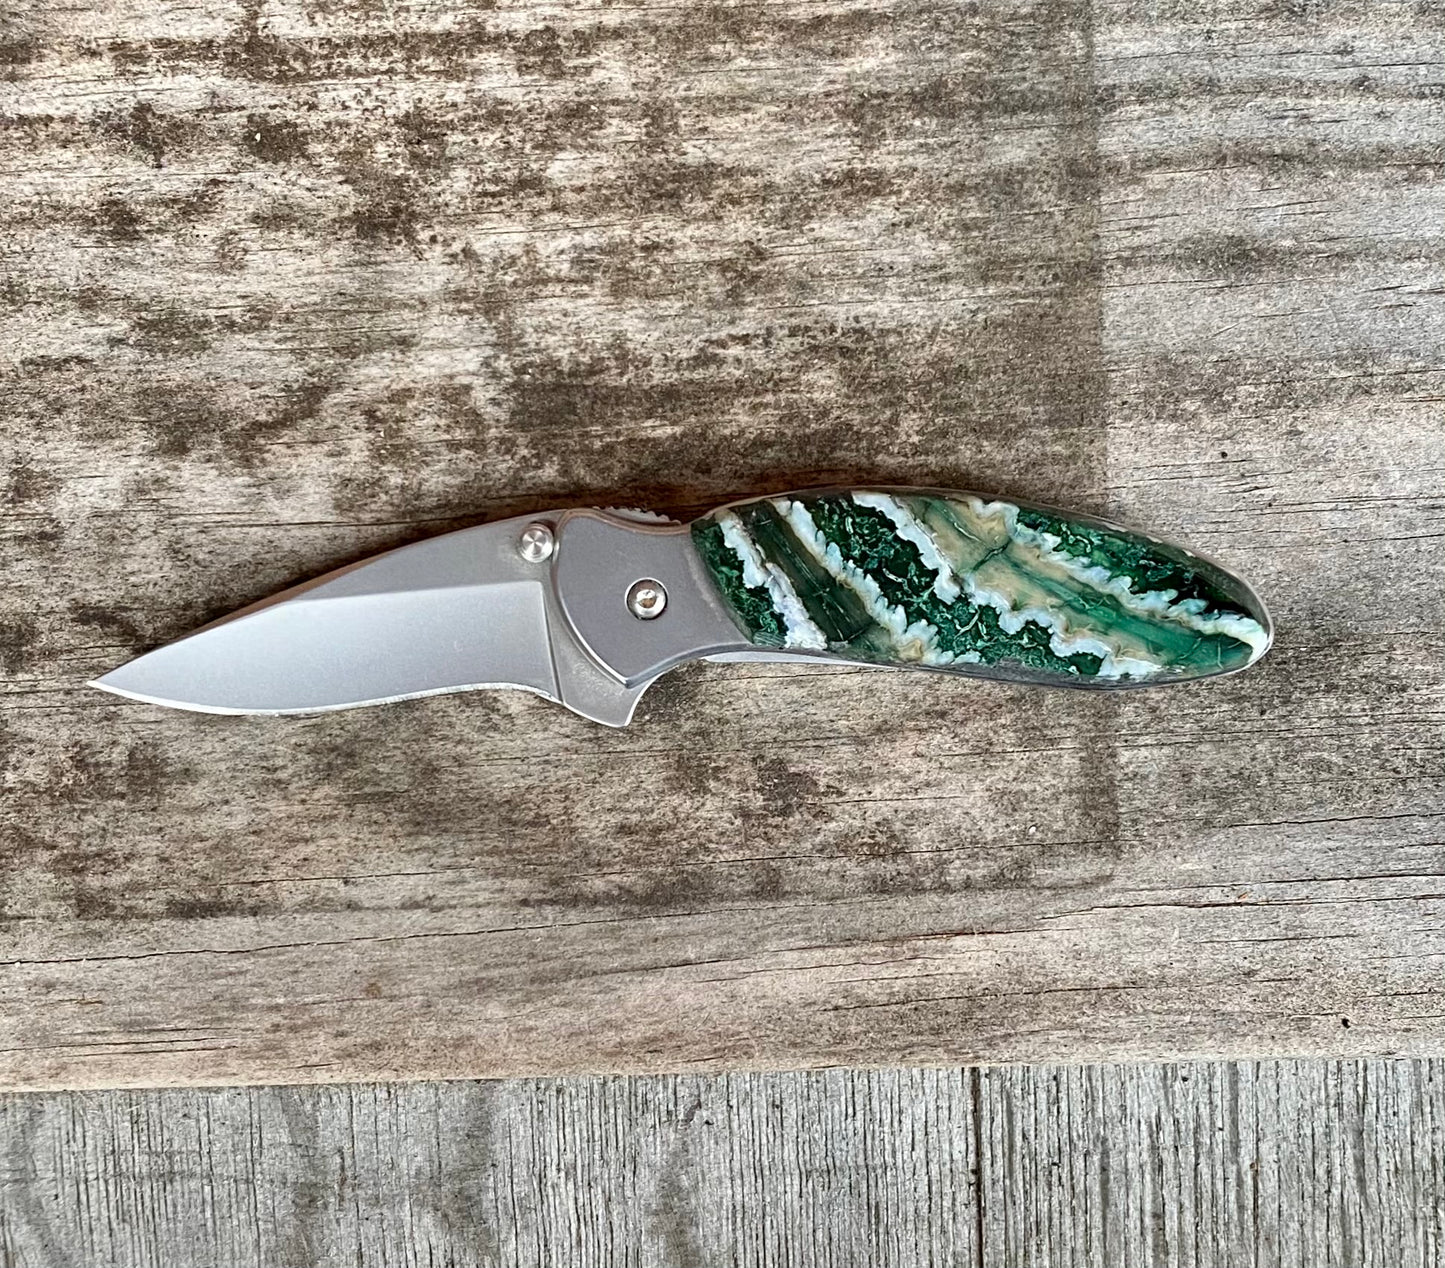 Kershaw Chive Mammoth Tooth Pocket Knife